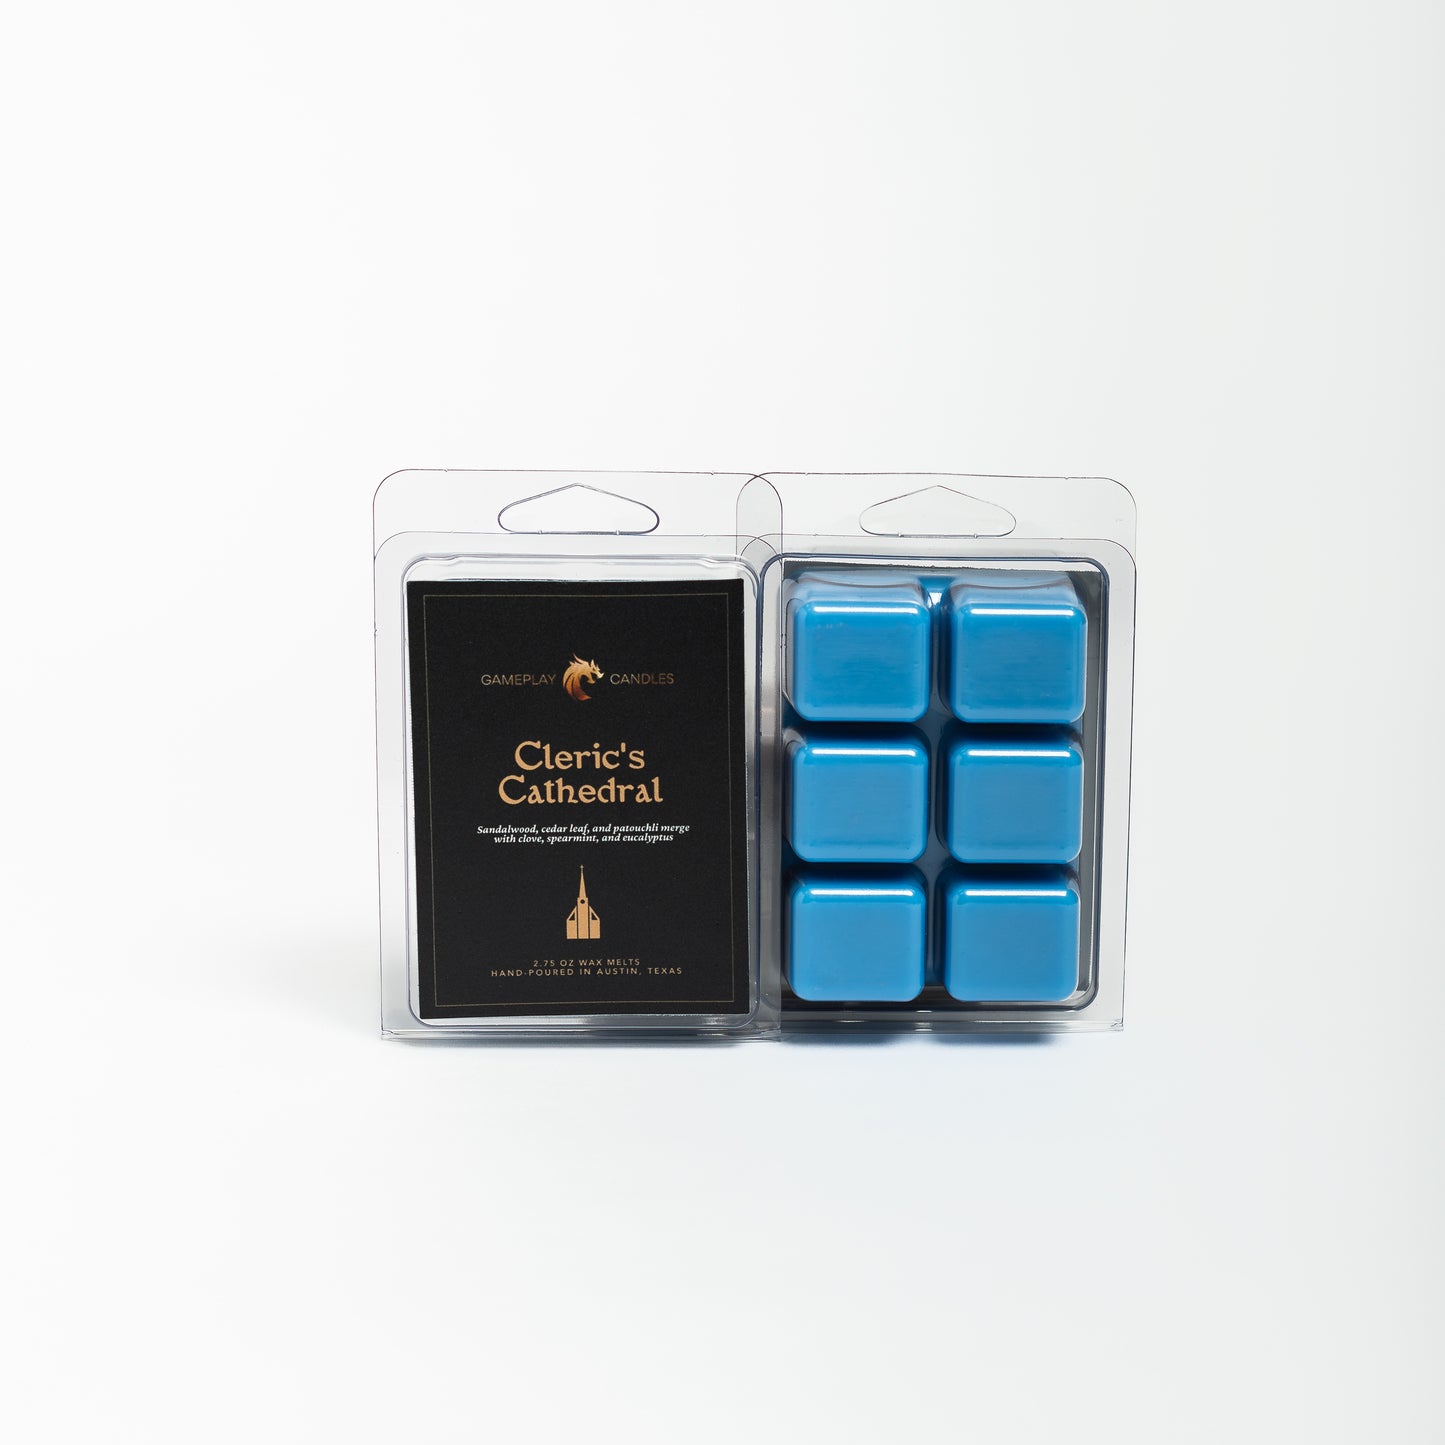 Cleric's Cathedral Wax Melts